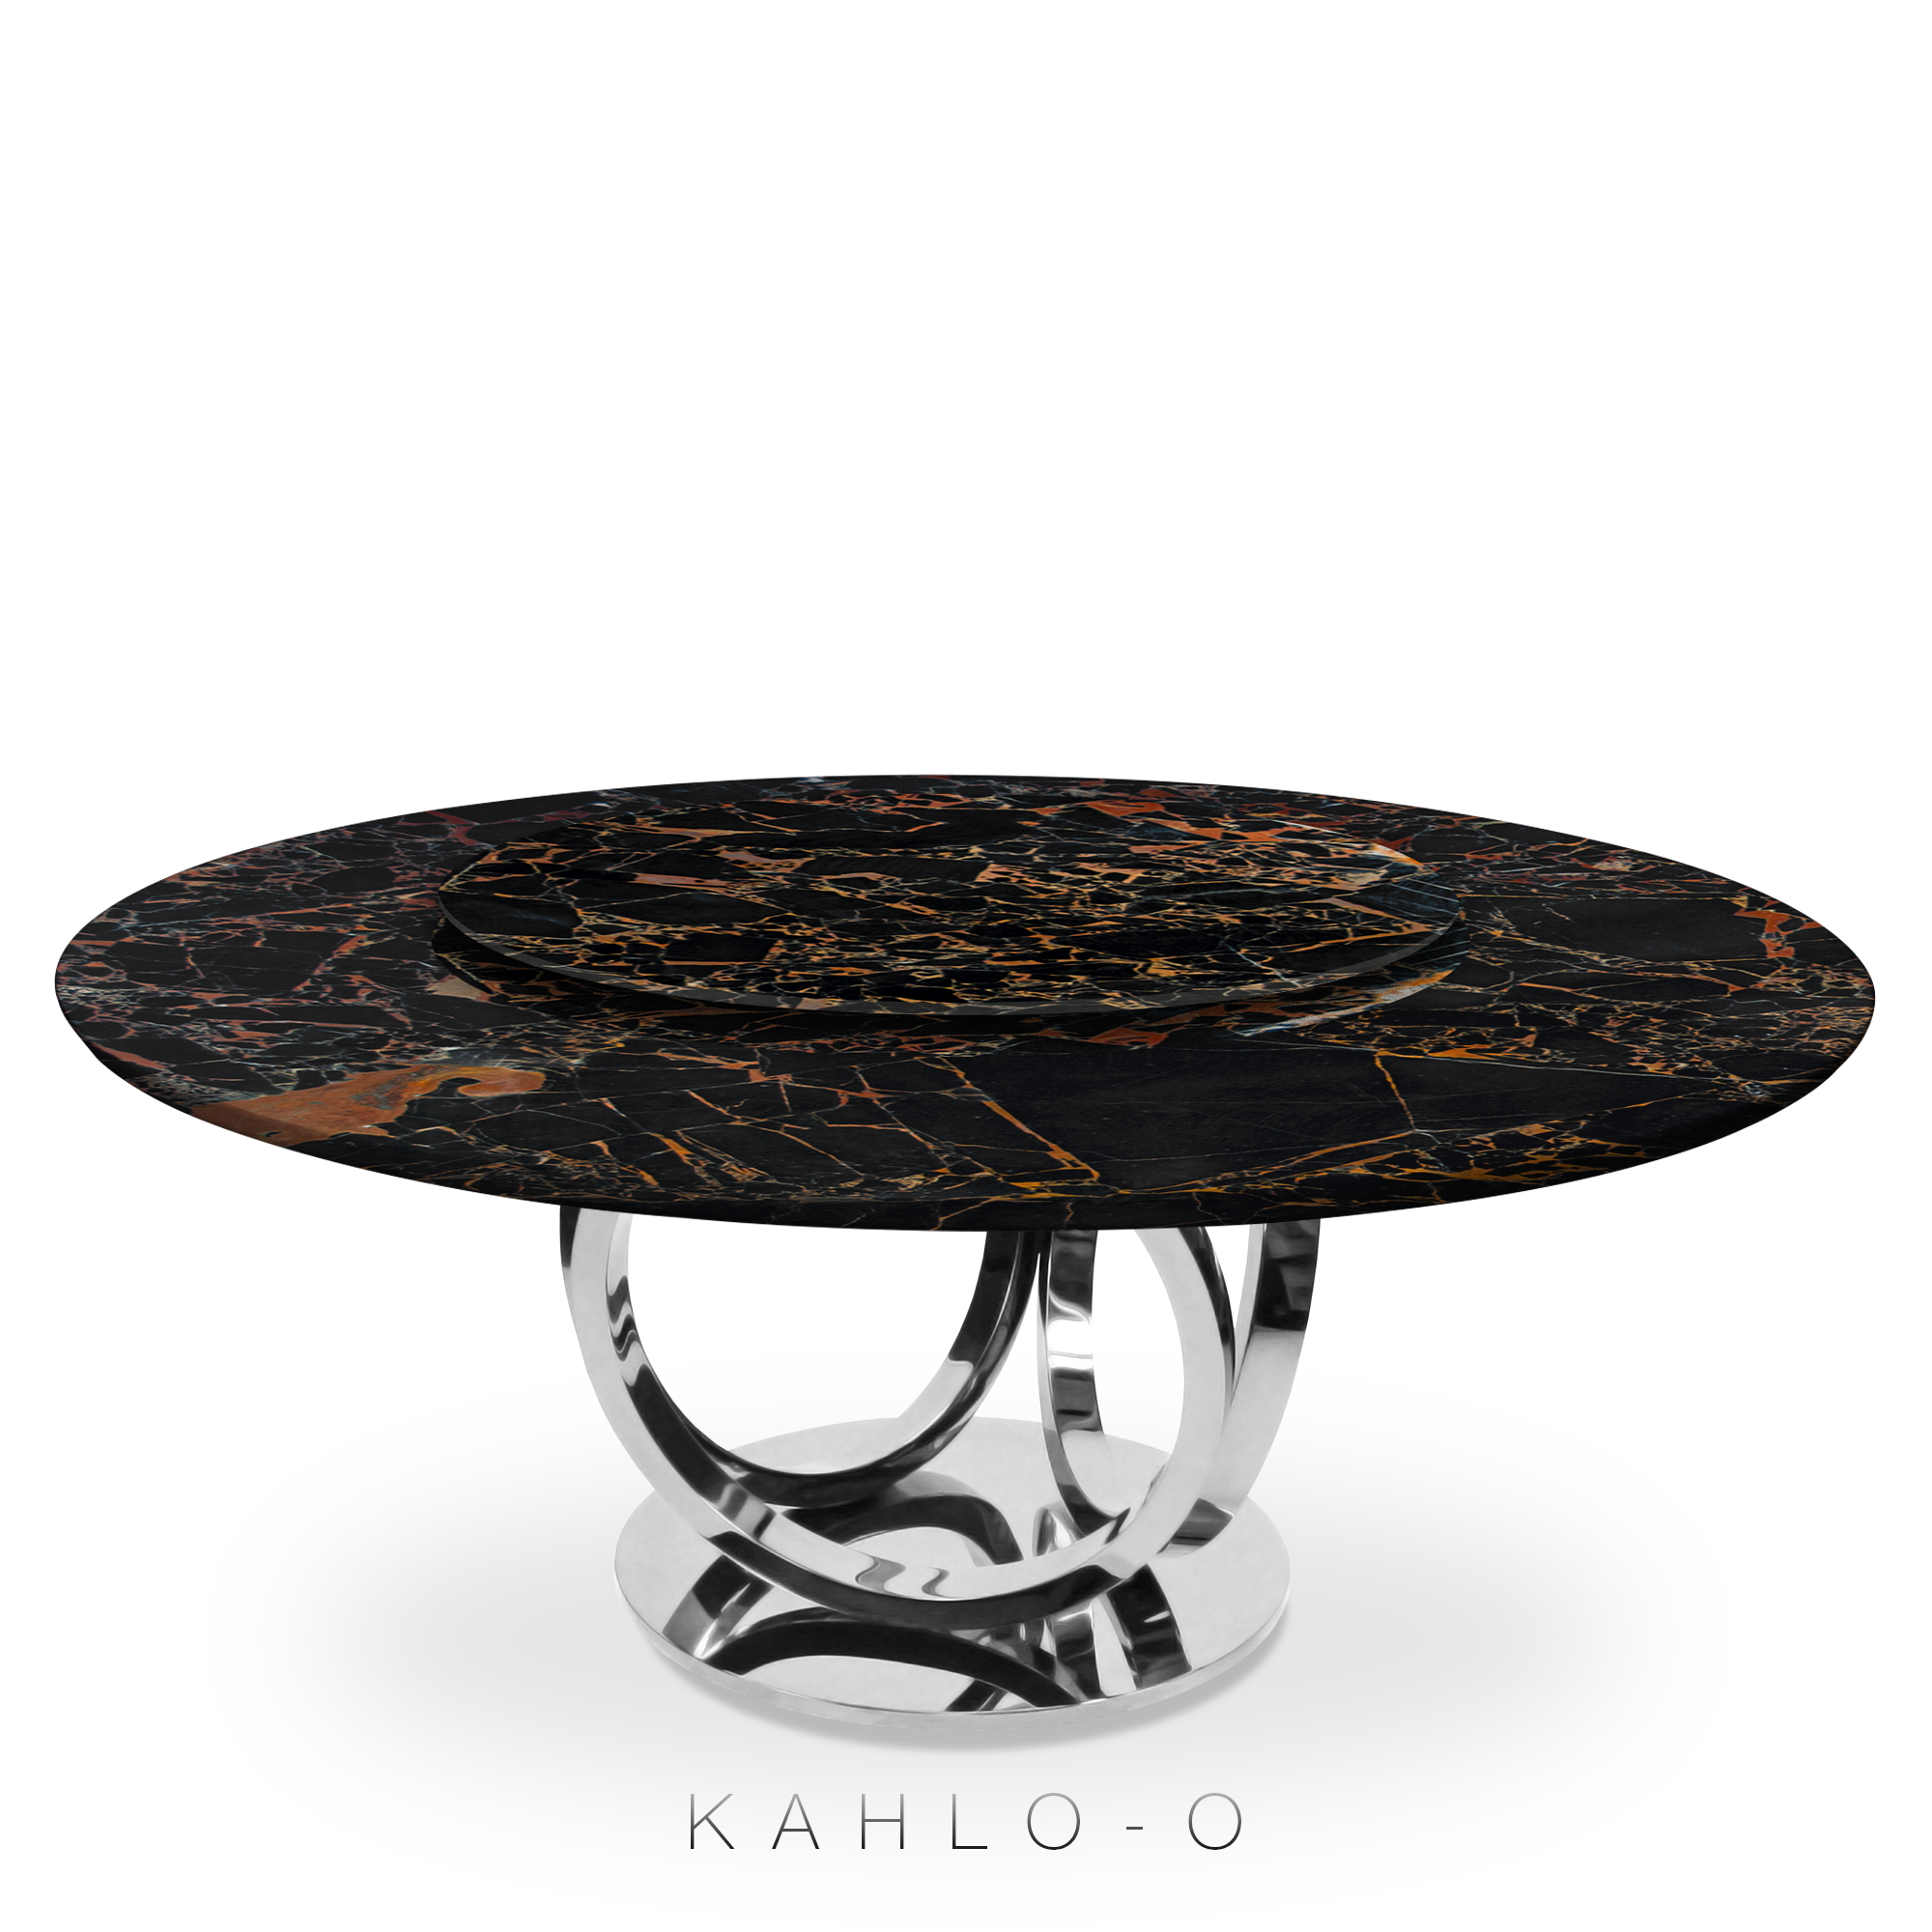 Kahlo O | Art Series | Decasa Marble Marble Dining Table